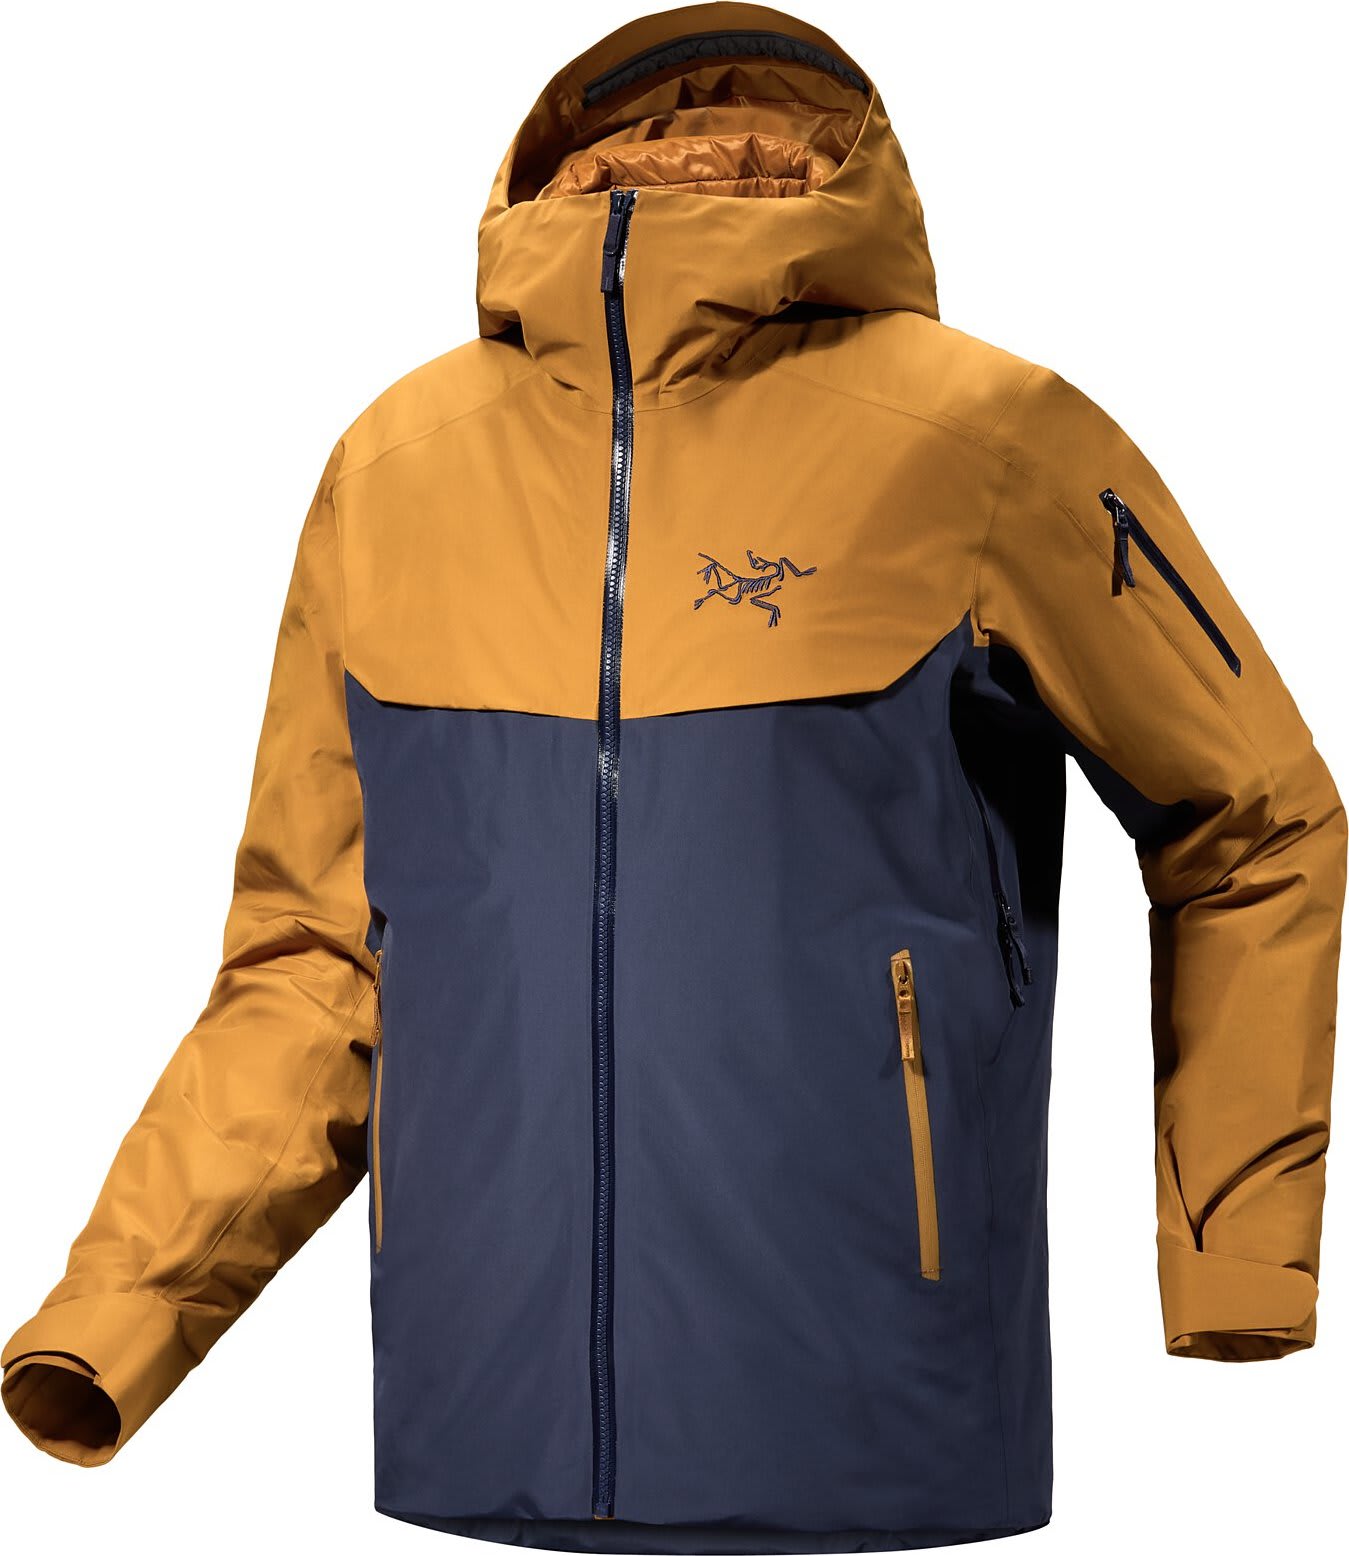 Buy Arc'teryx Men's Macai Lightweight Jacket from Outnorth